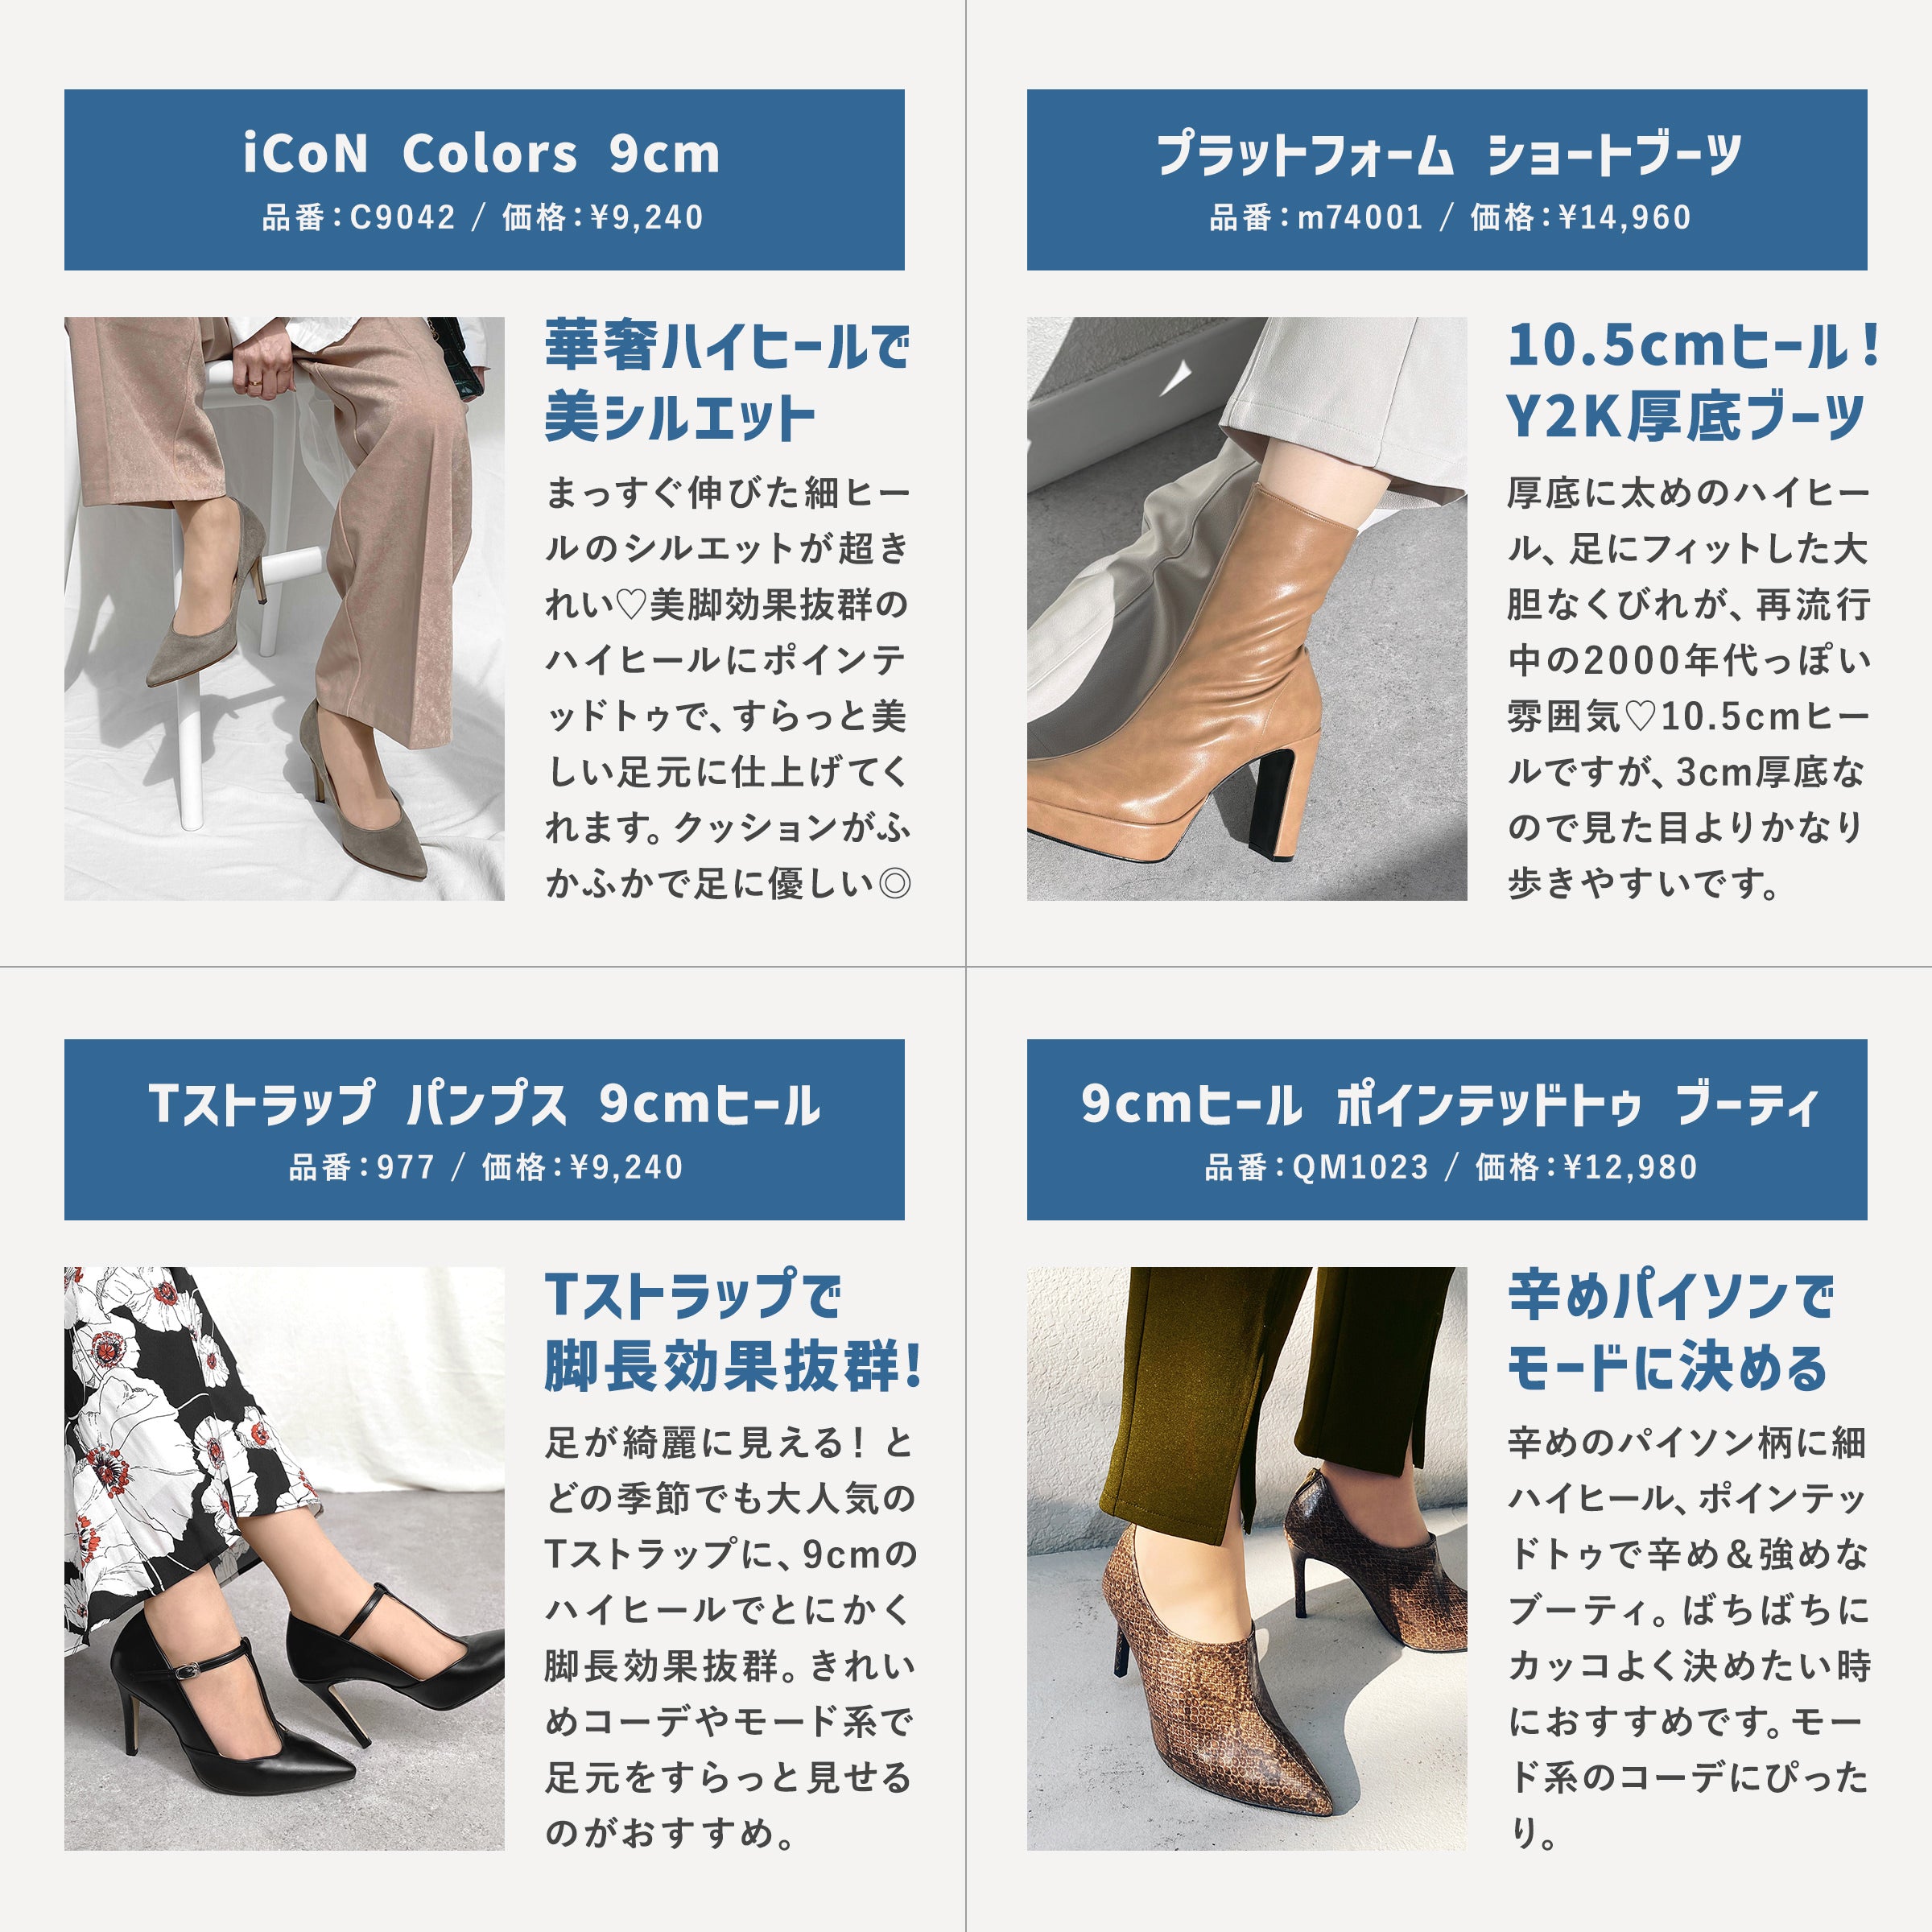 For all high heel lovers! Special feature on heels over 8.0cm